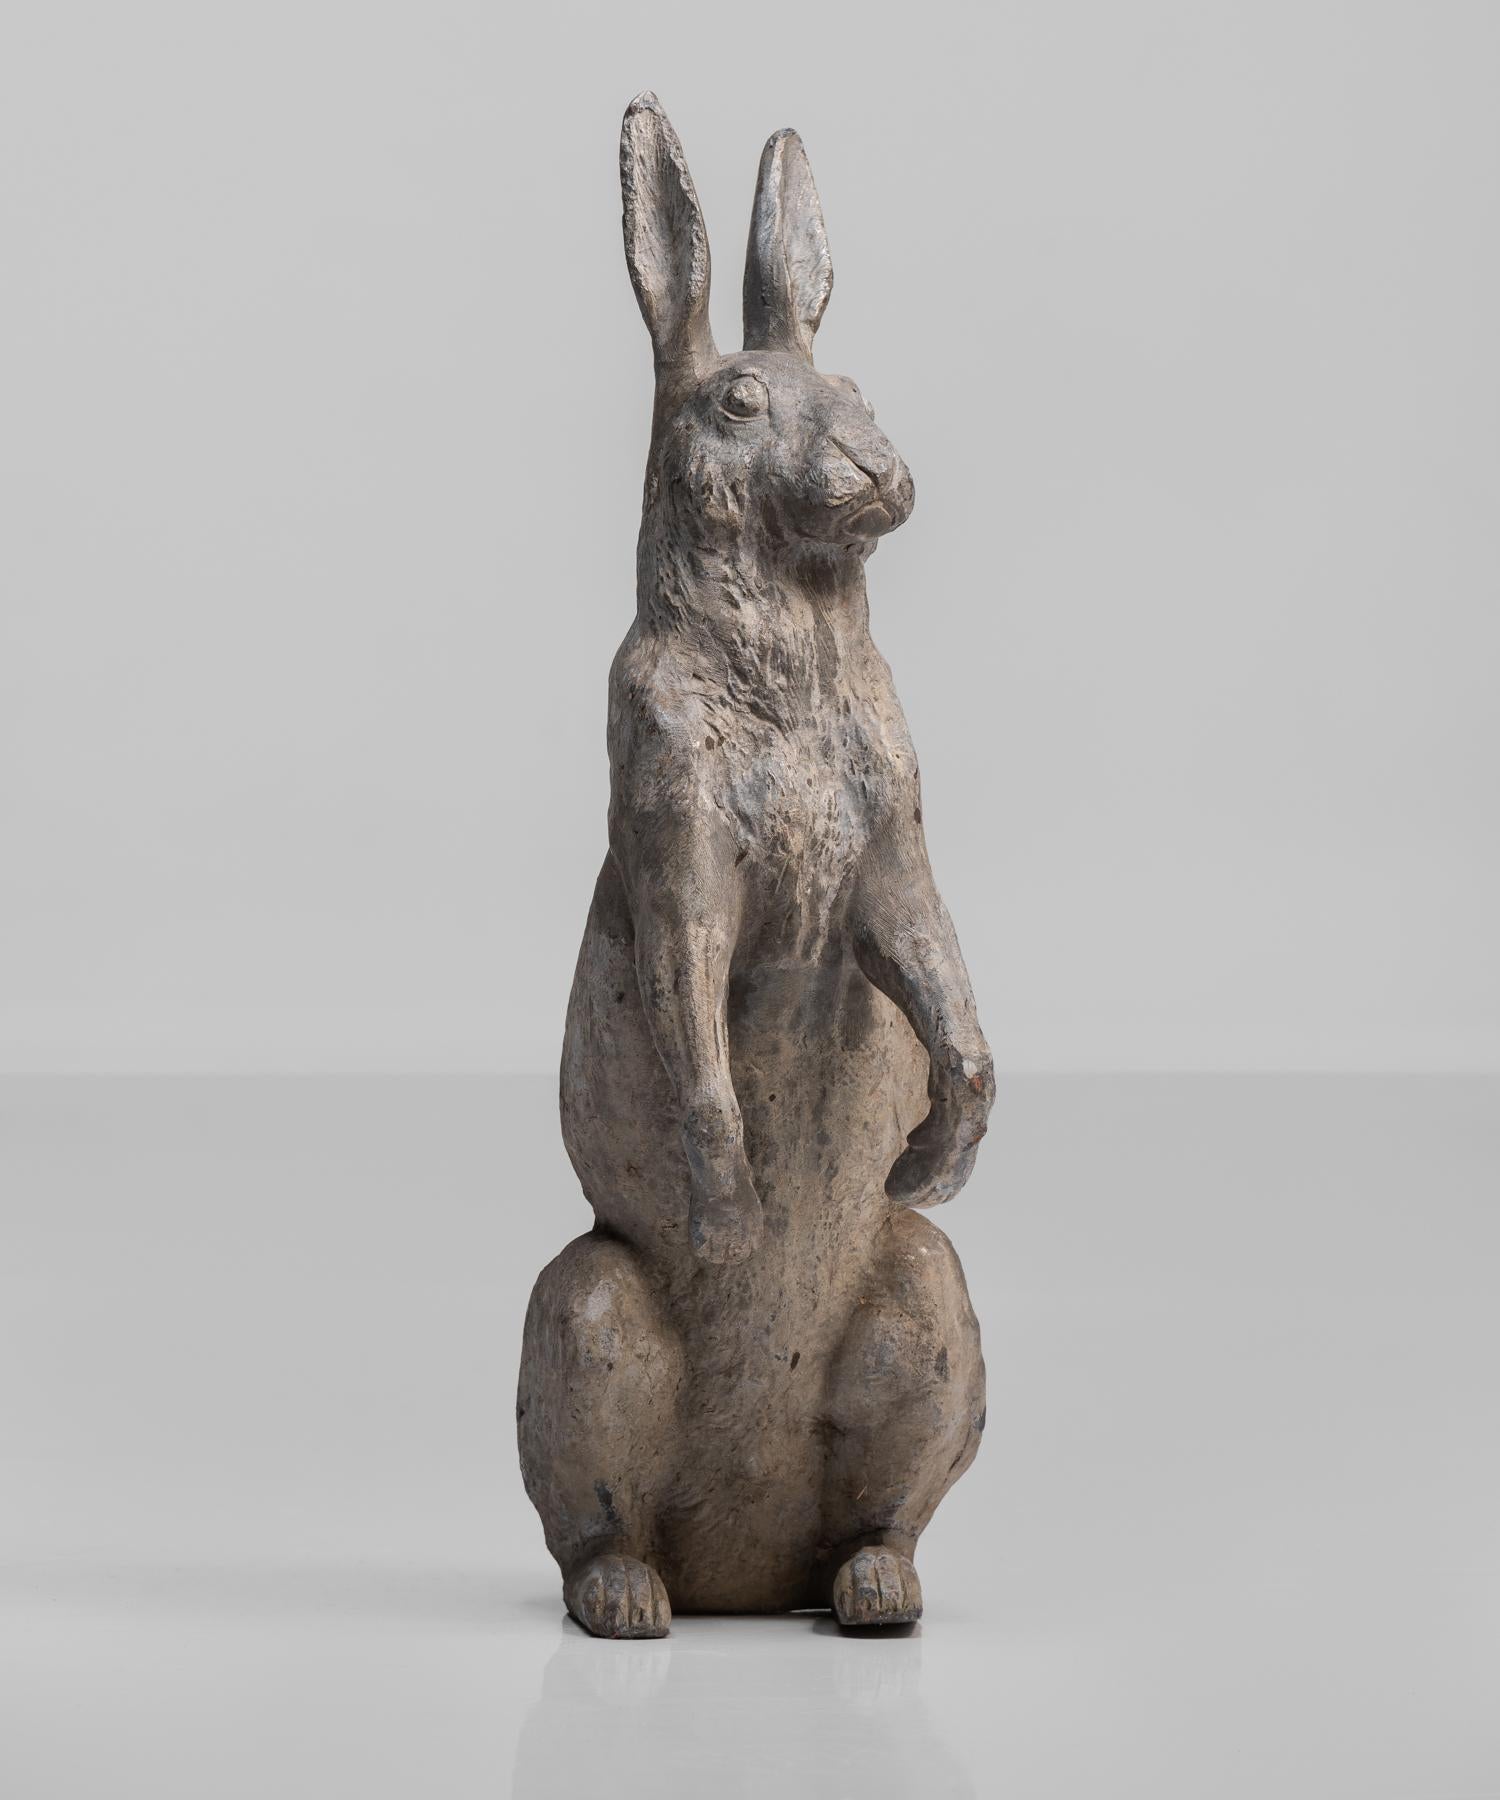 Lead garden rabbit, England, circa 1920.

An attentive garden friend with perched ears and incredible patina.